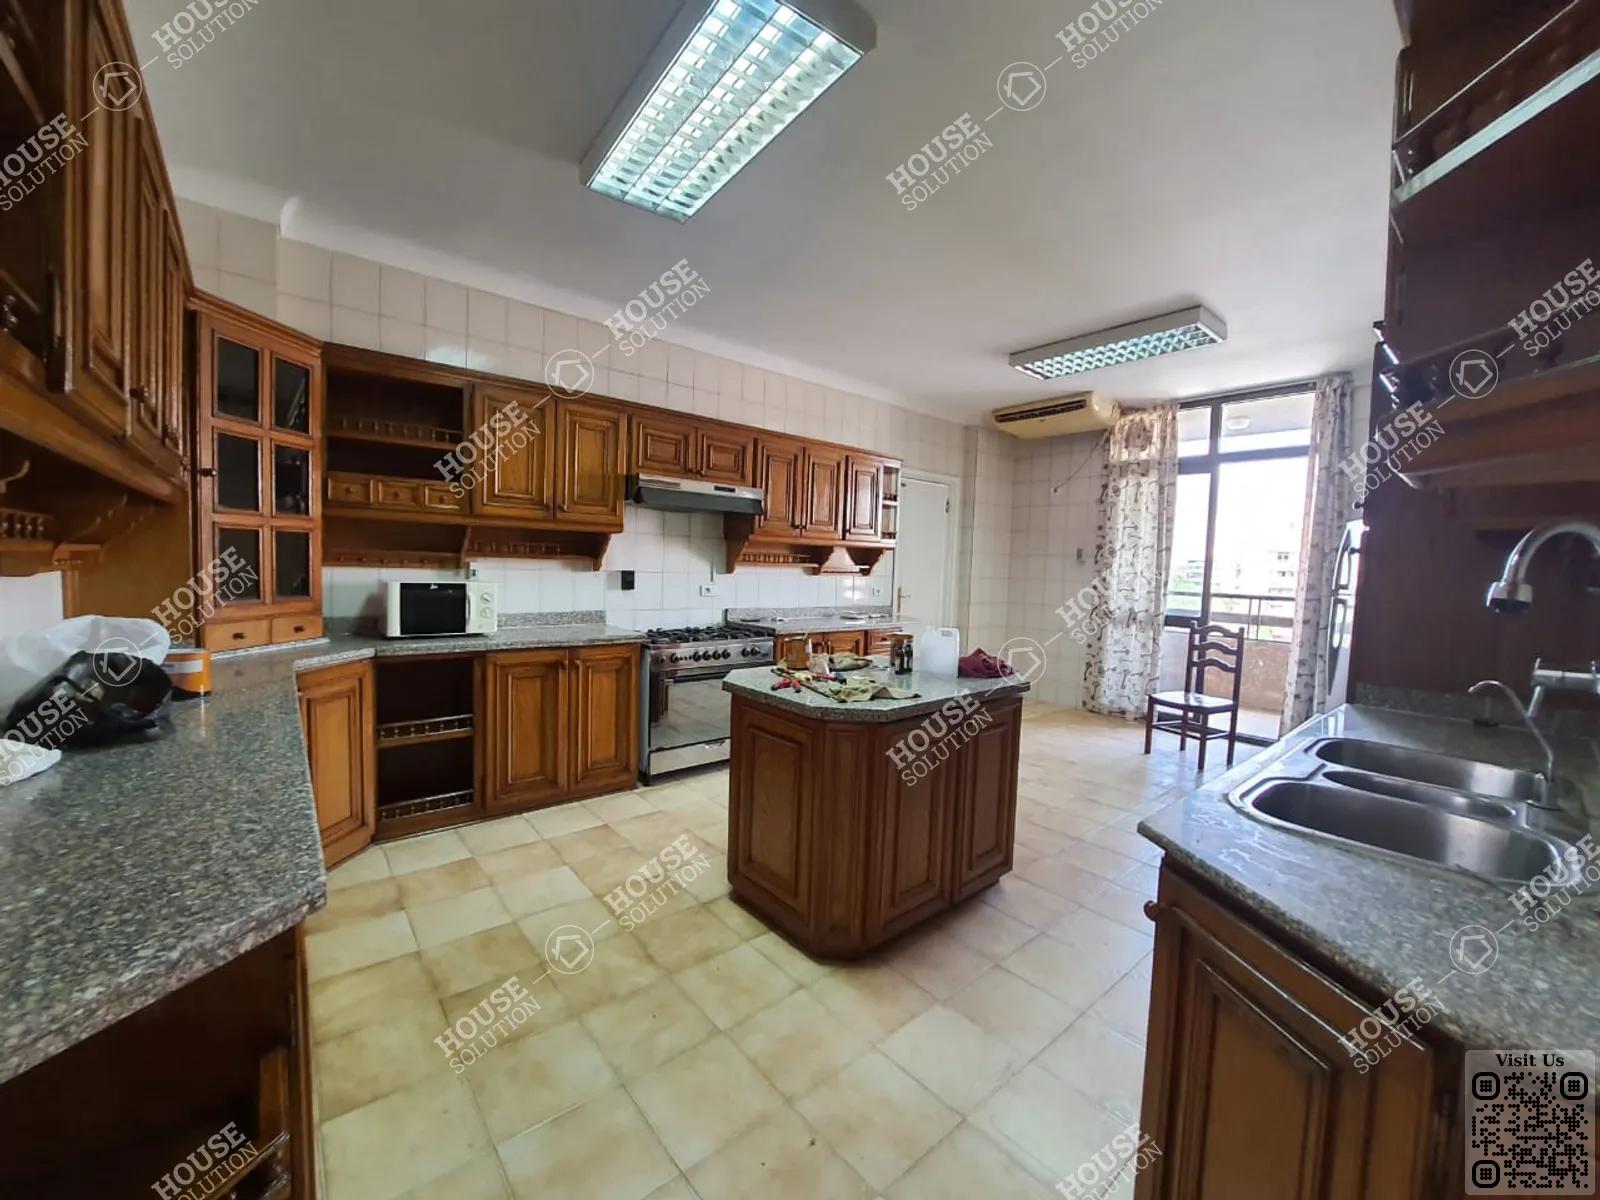 KITCHEN  @ Apartments For Rent In Maadi Maadi Sarayat Area: 380 m² consists of 4 Bedrooms 3 Bathrooms Furnished 5 stars #5083-1